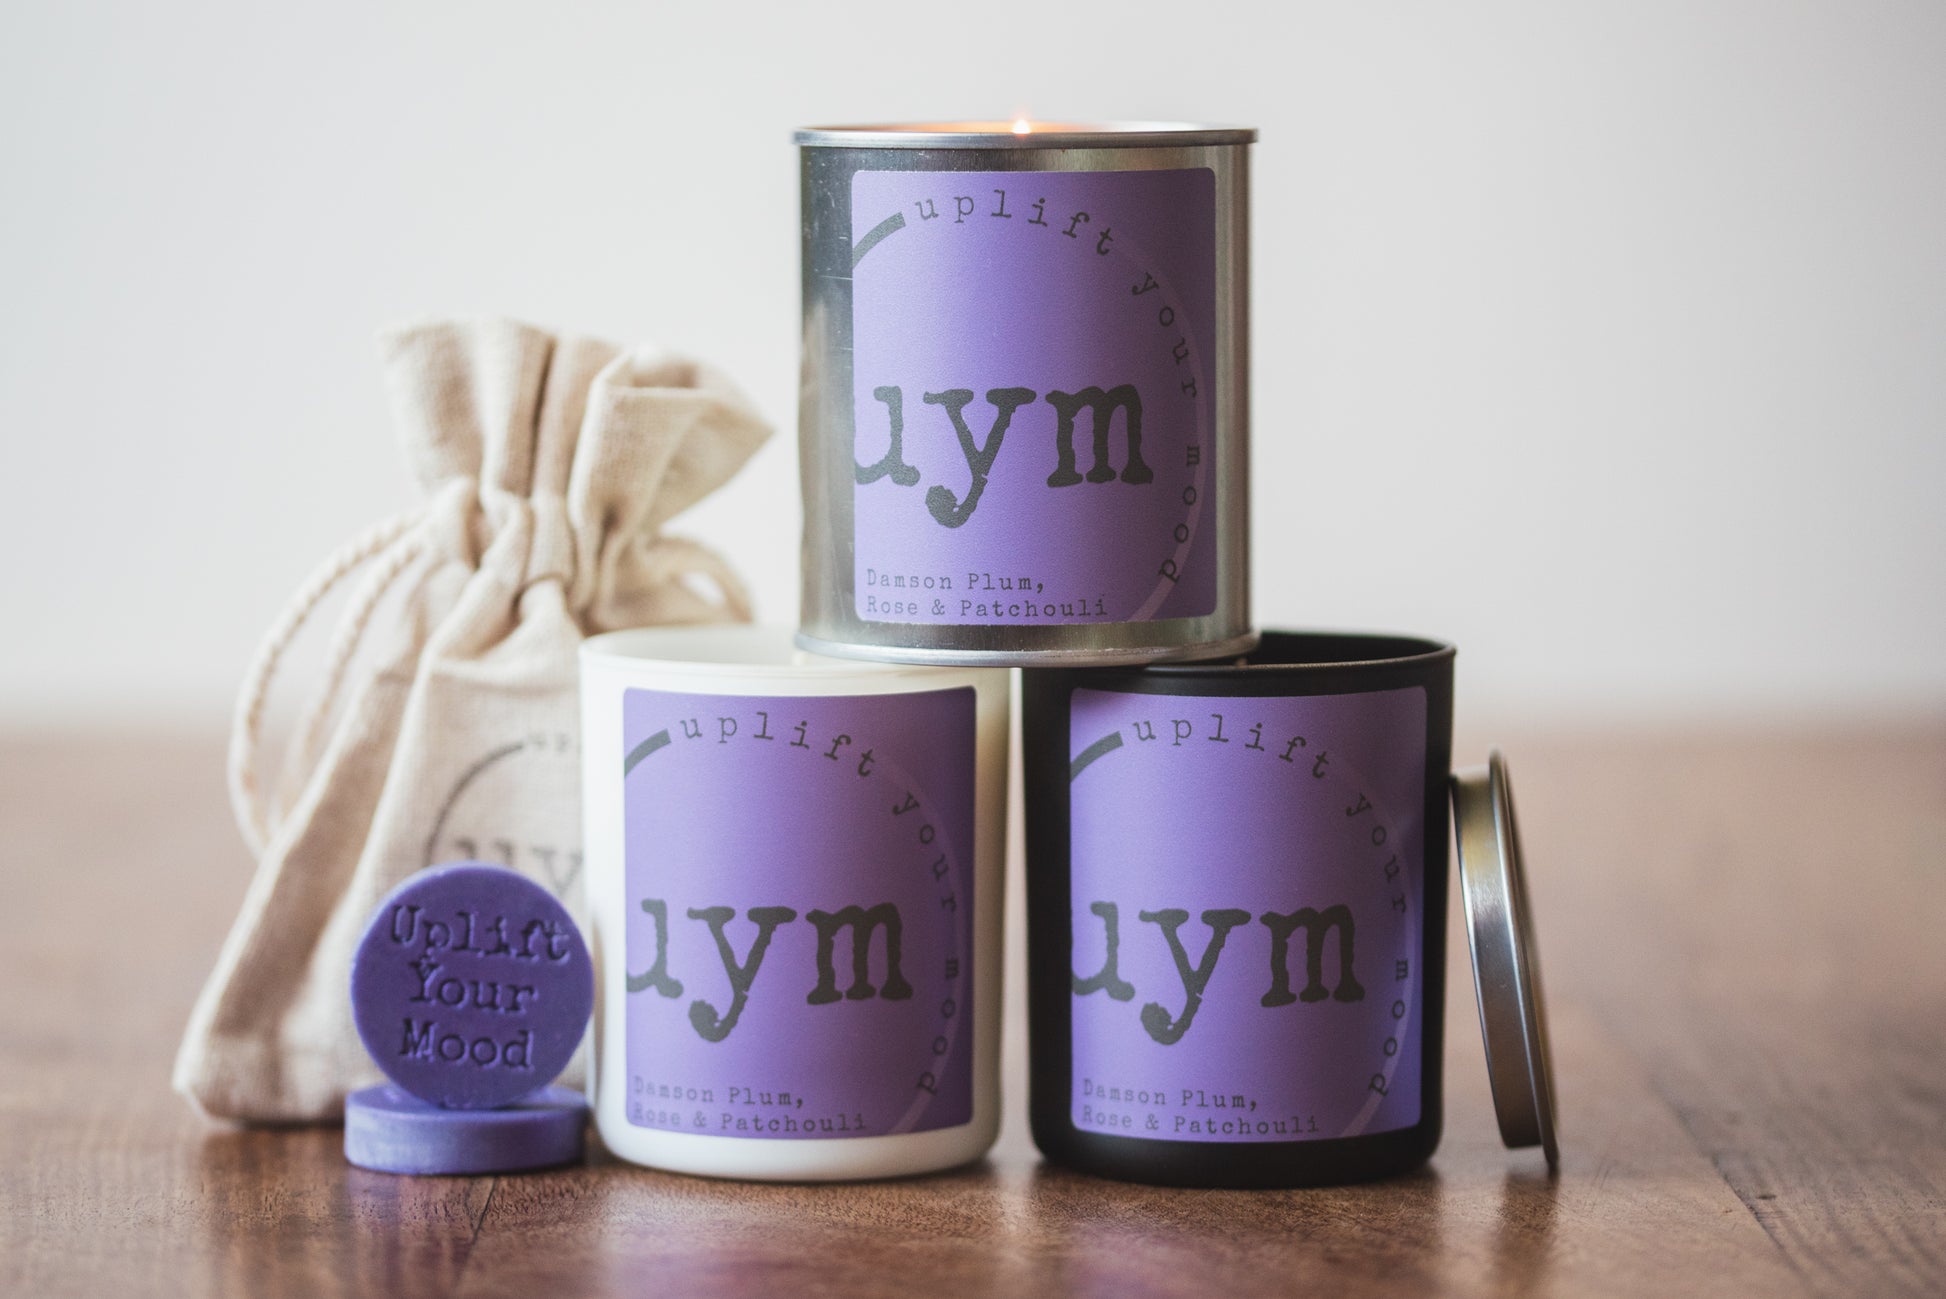 Damson Plum, Rose & Patchouli Candles and wax melts, highly sceted natural wax, organic cotton wick, various container to choose from, purle label. Uplift Your Mood Scents